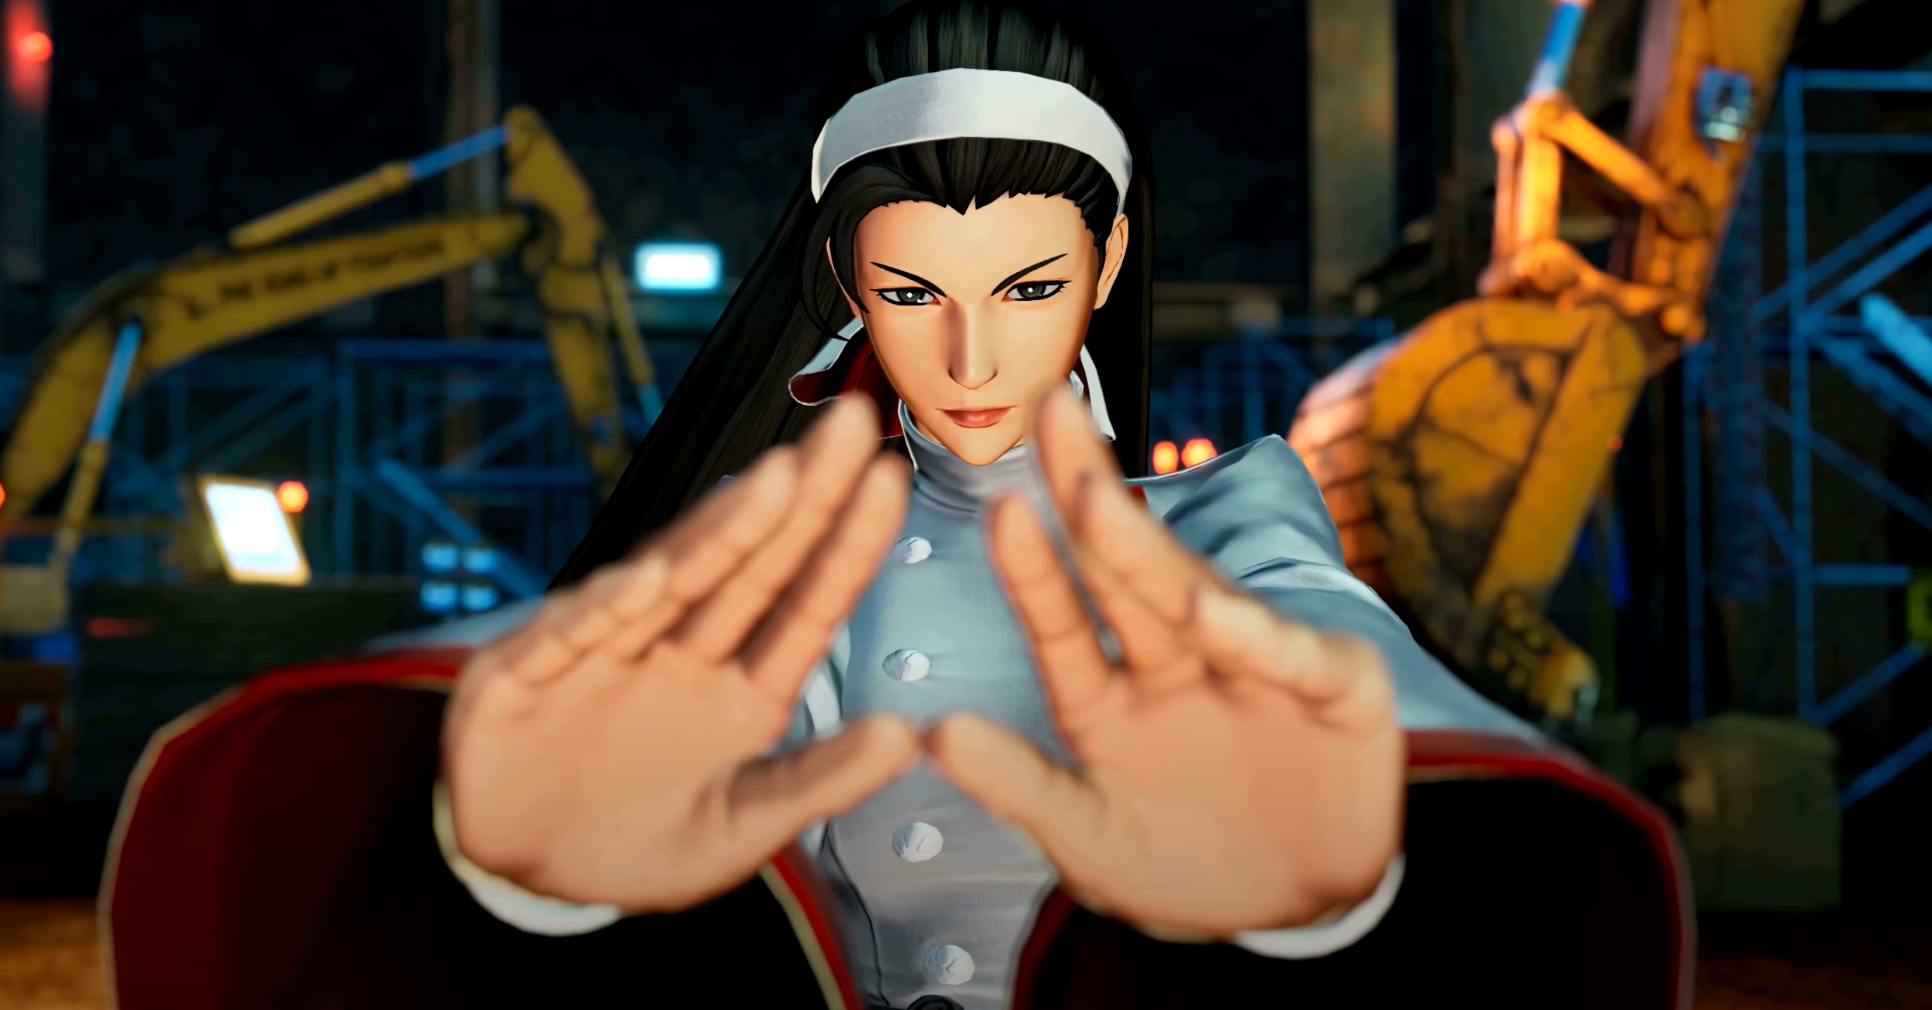 Image for Chizuru Kagura confirmed for The King of Fighters 15